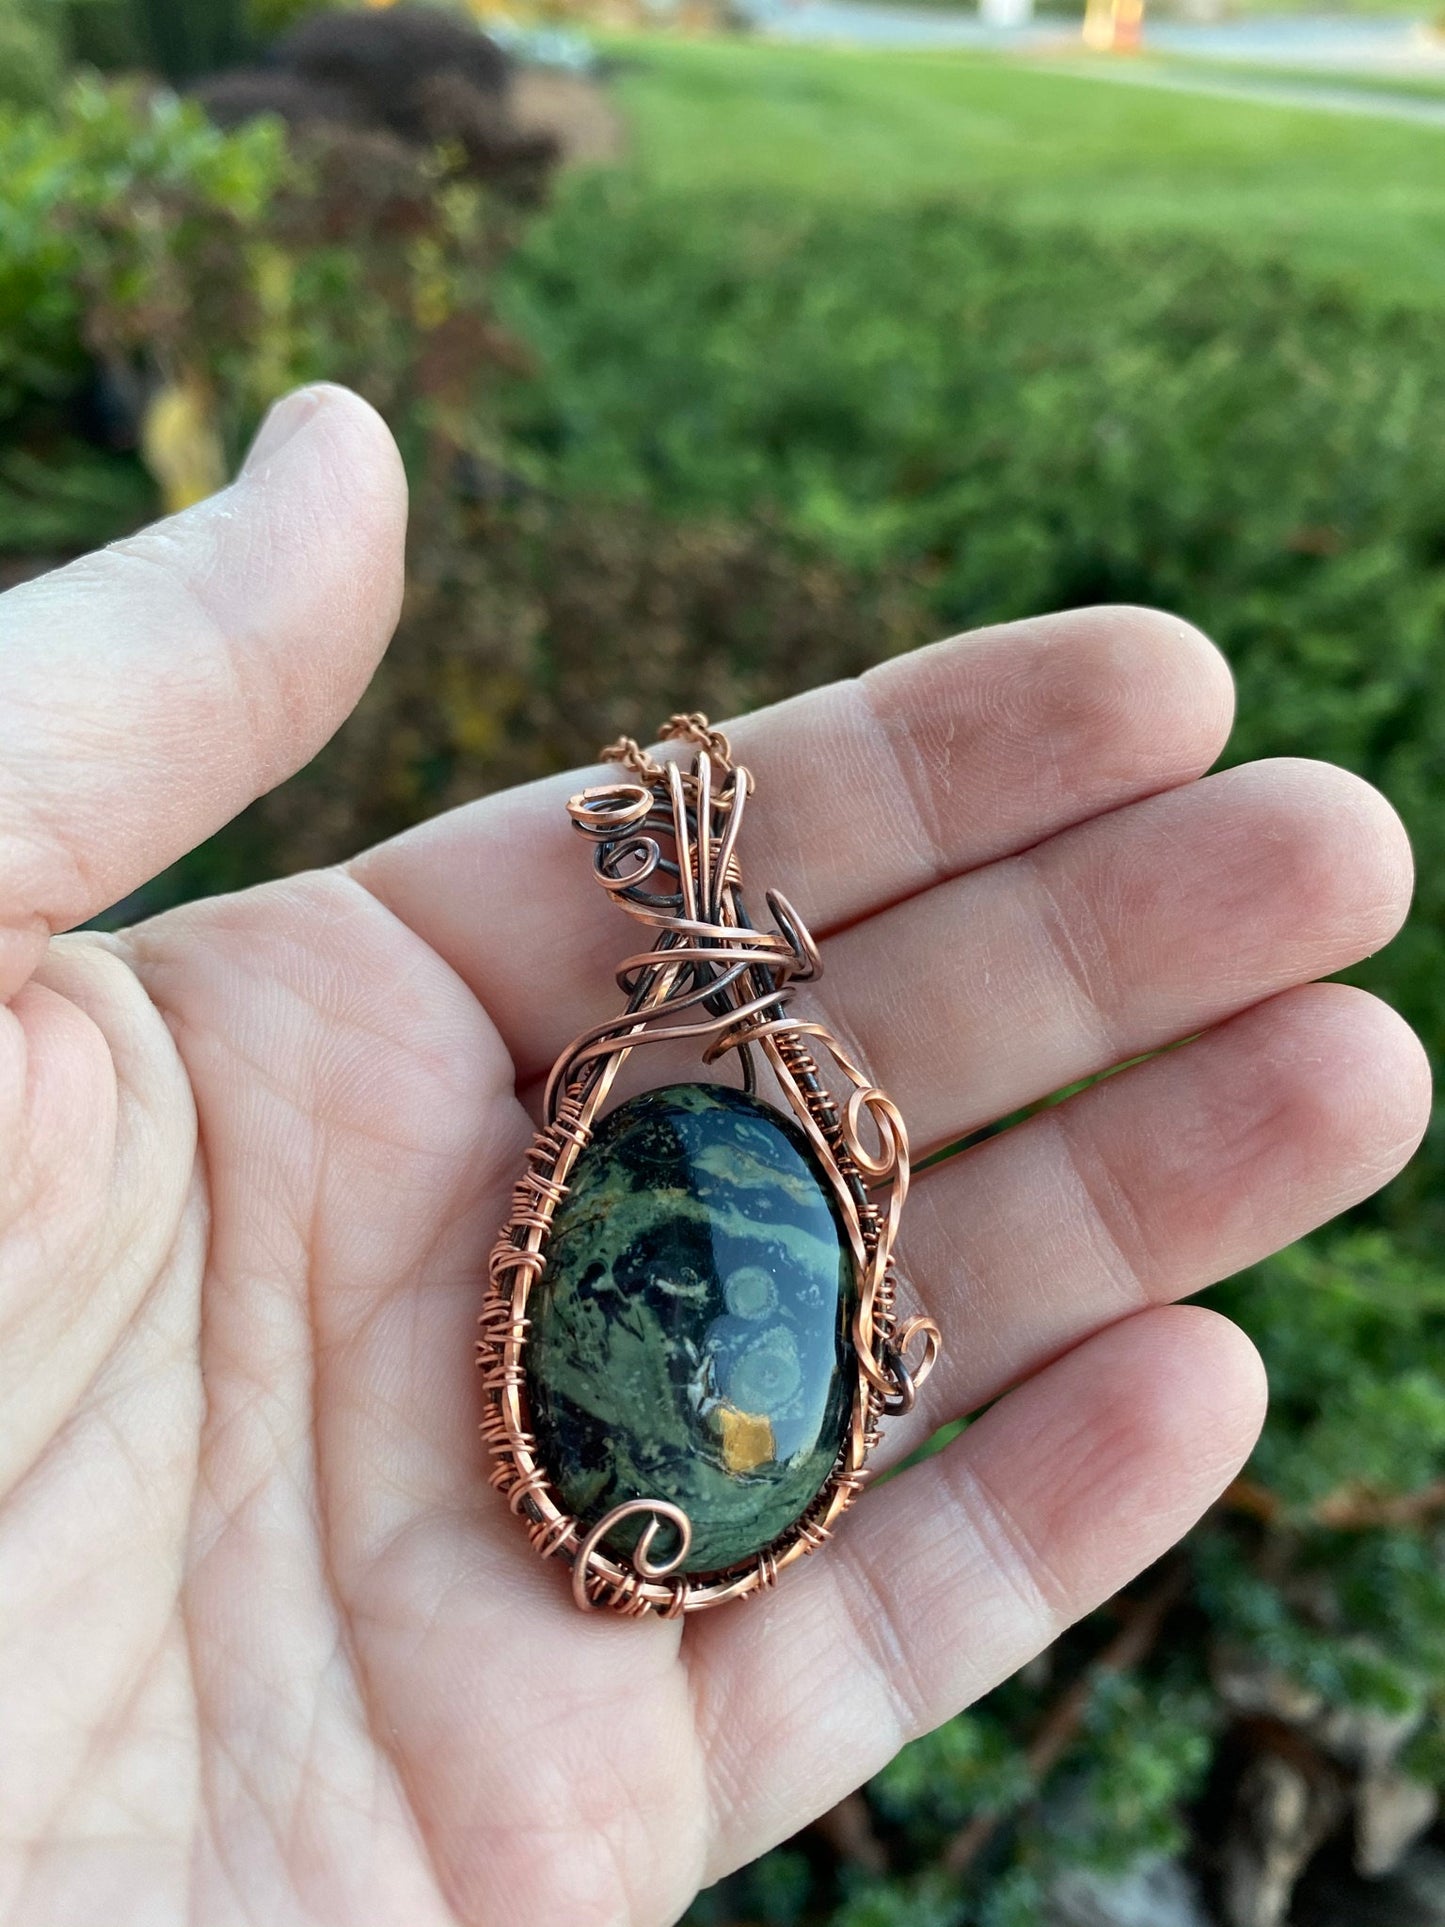 Natural Kambaba Jasper, Wire Wrapped and Woven Oval Pendant